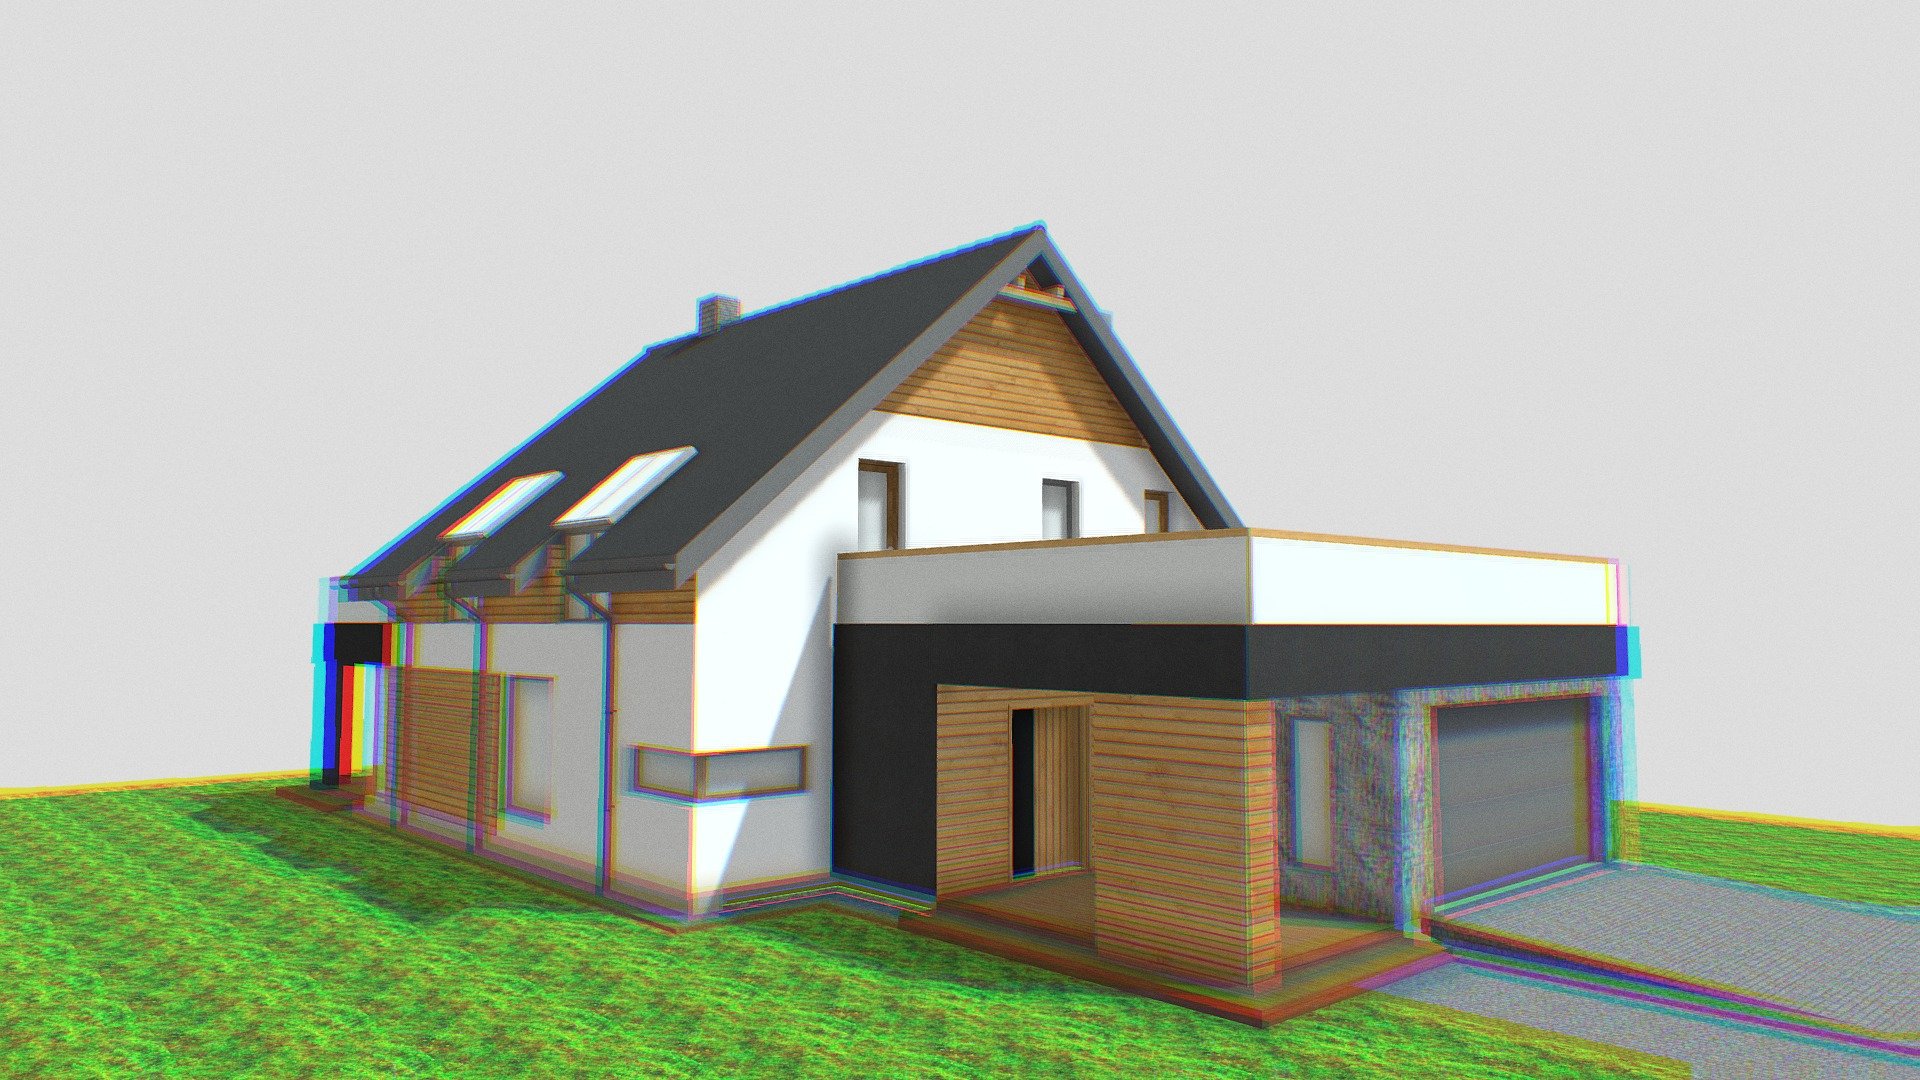 bungalow house design with attic